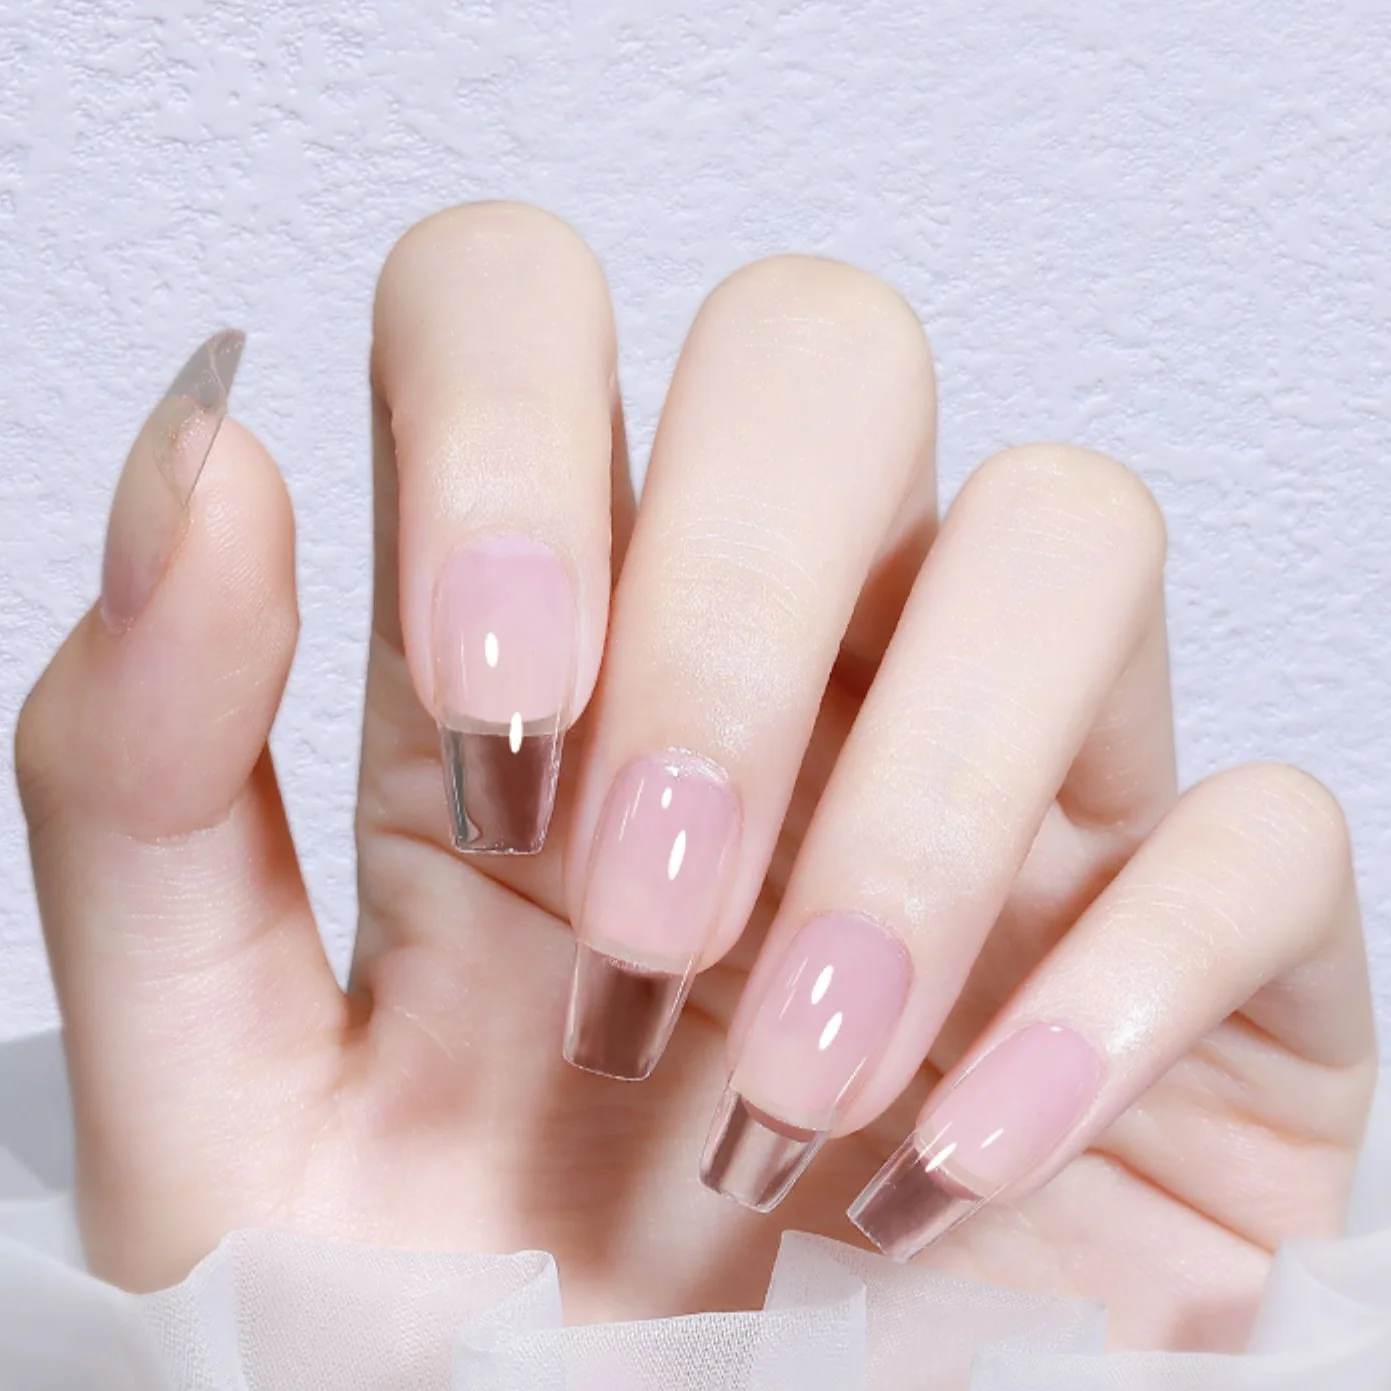 Gel Extensions Full Set with transparent or natural tips - Holy Nails Pune